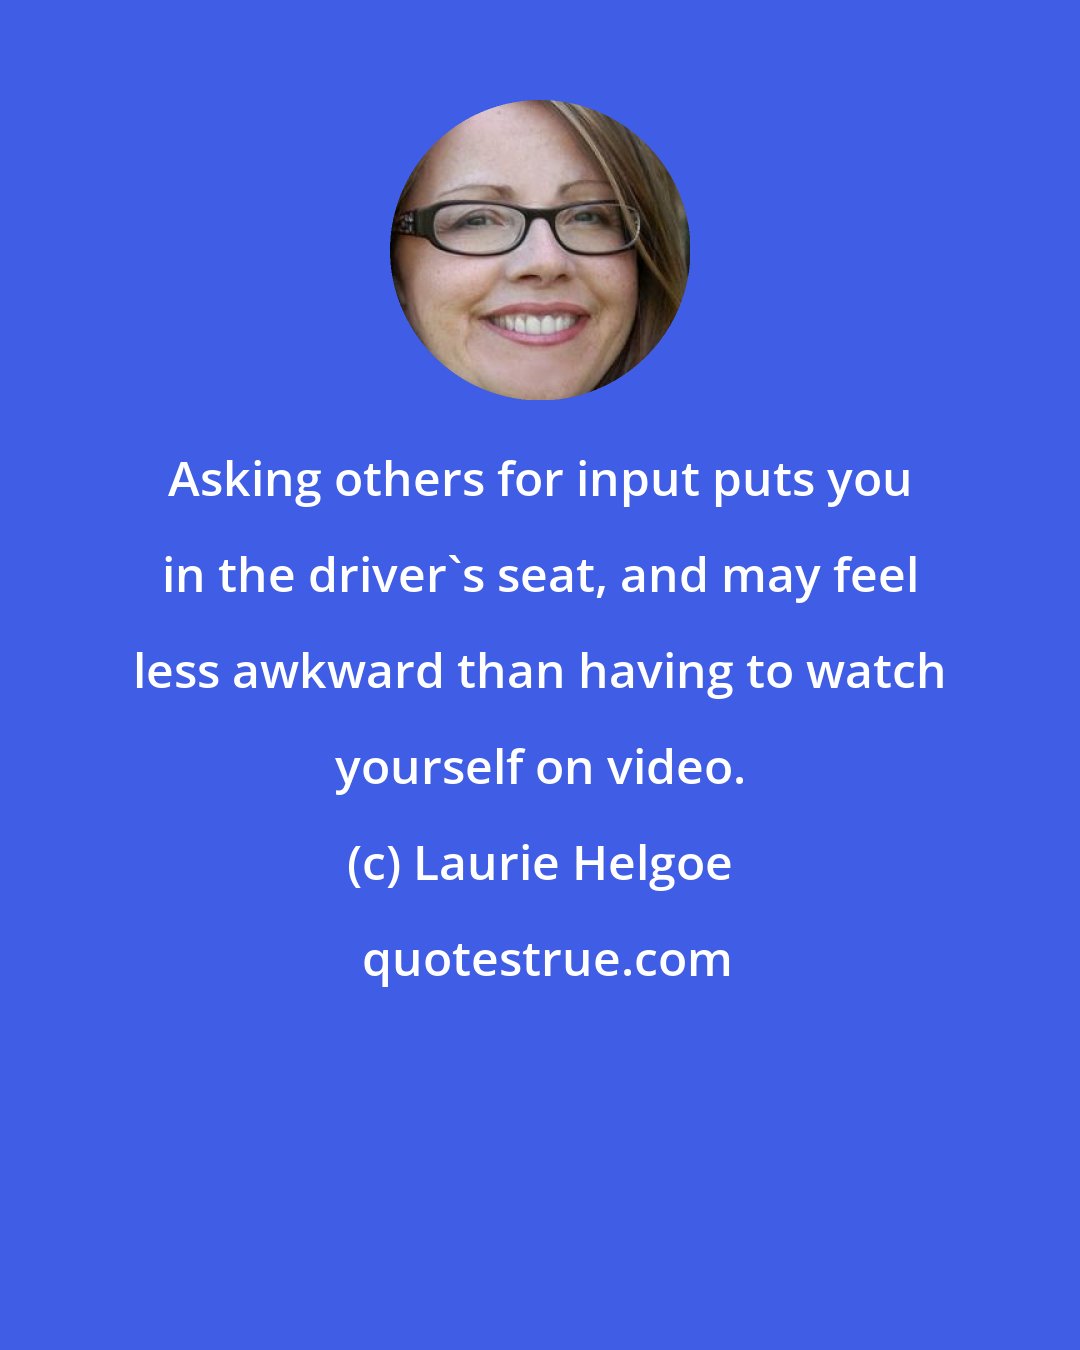 Laurie Helgoe: Asking others for input puts you in the driver's seat, and may feel less awkward than having to watch yourself on video.